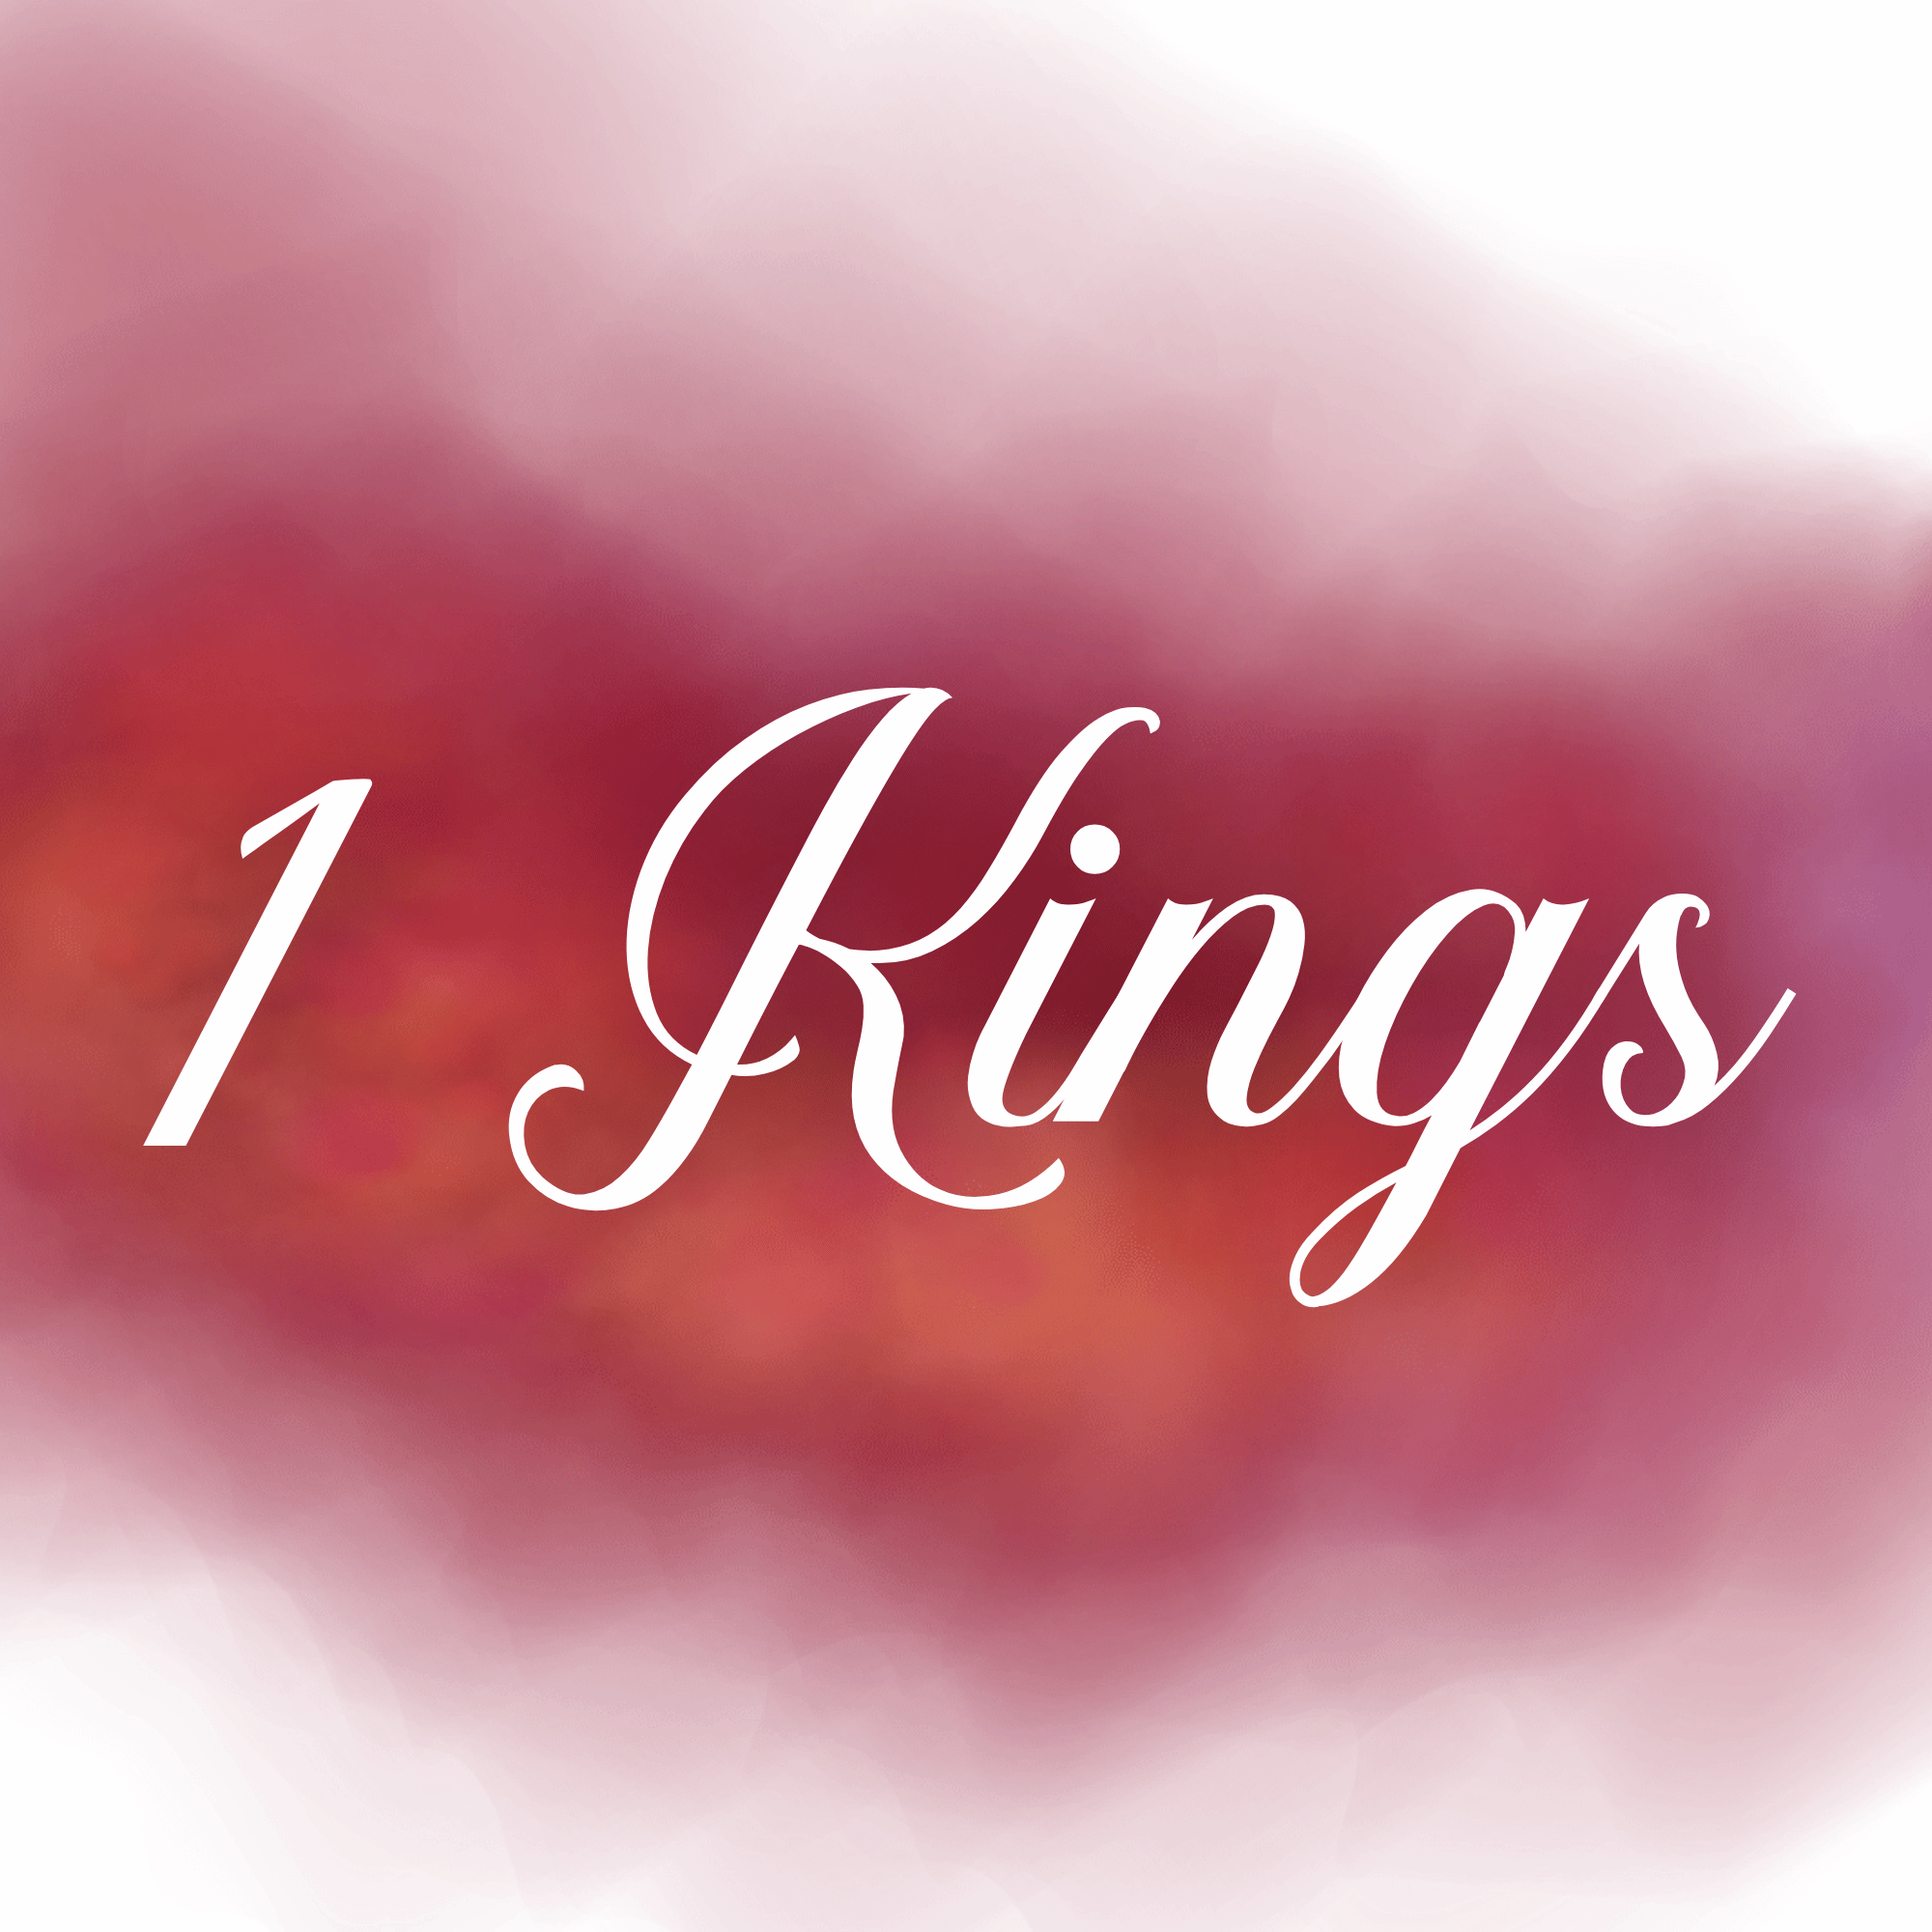 1 Kings | Chapter 1